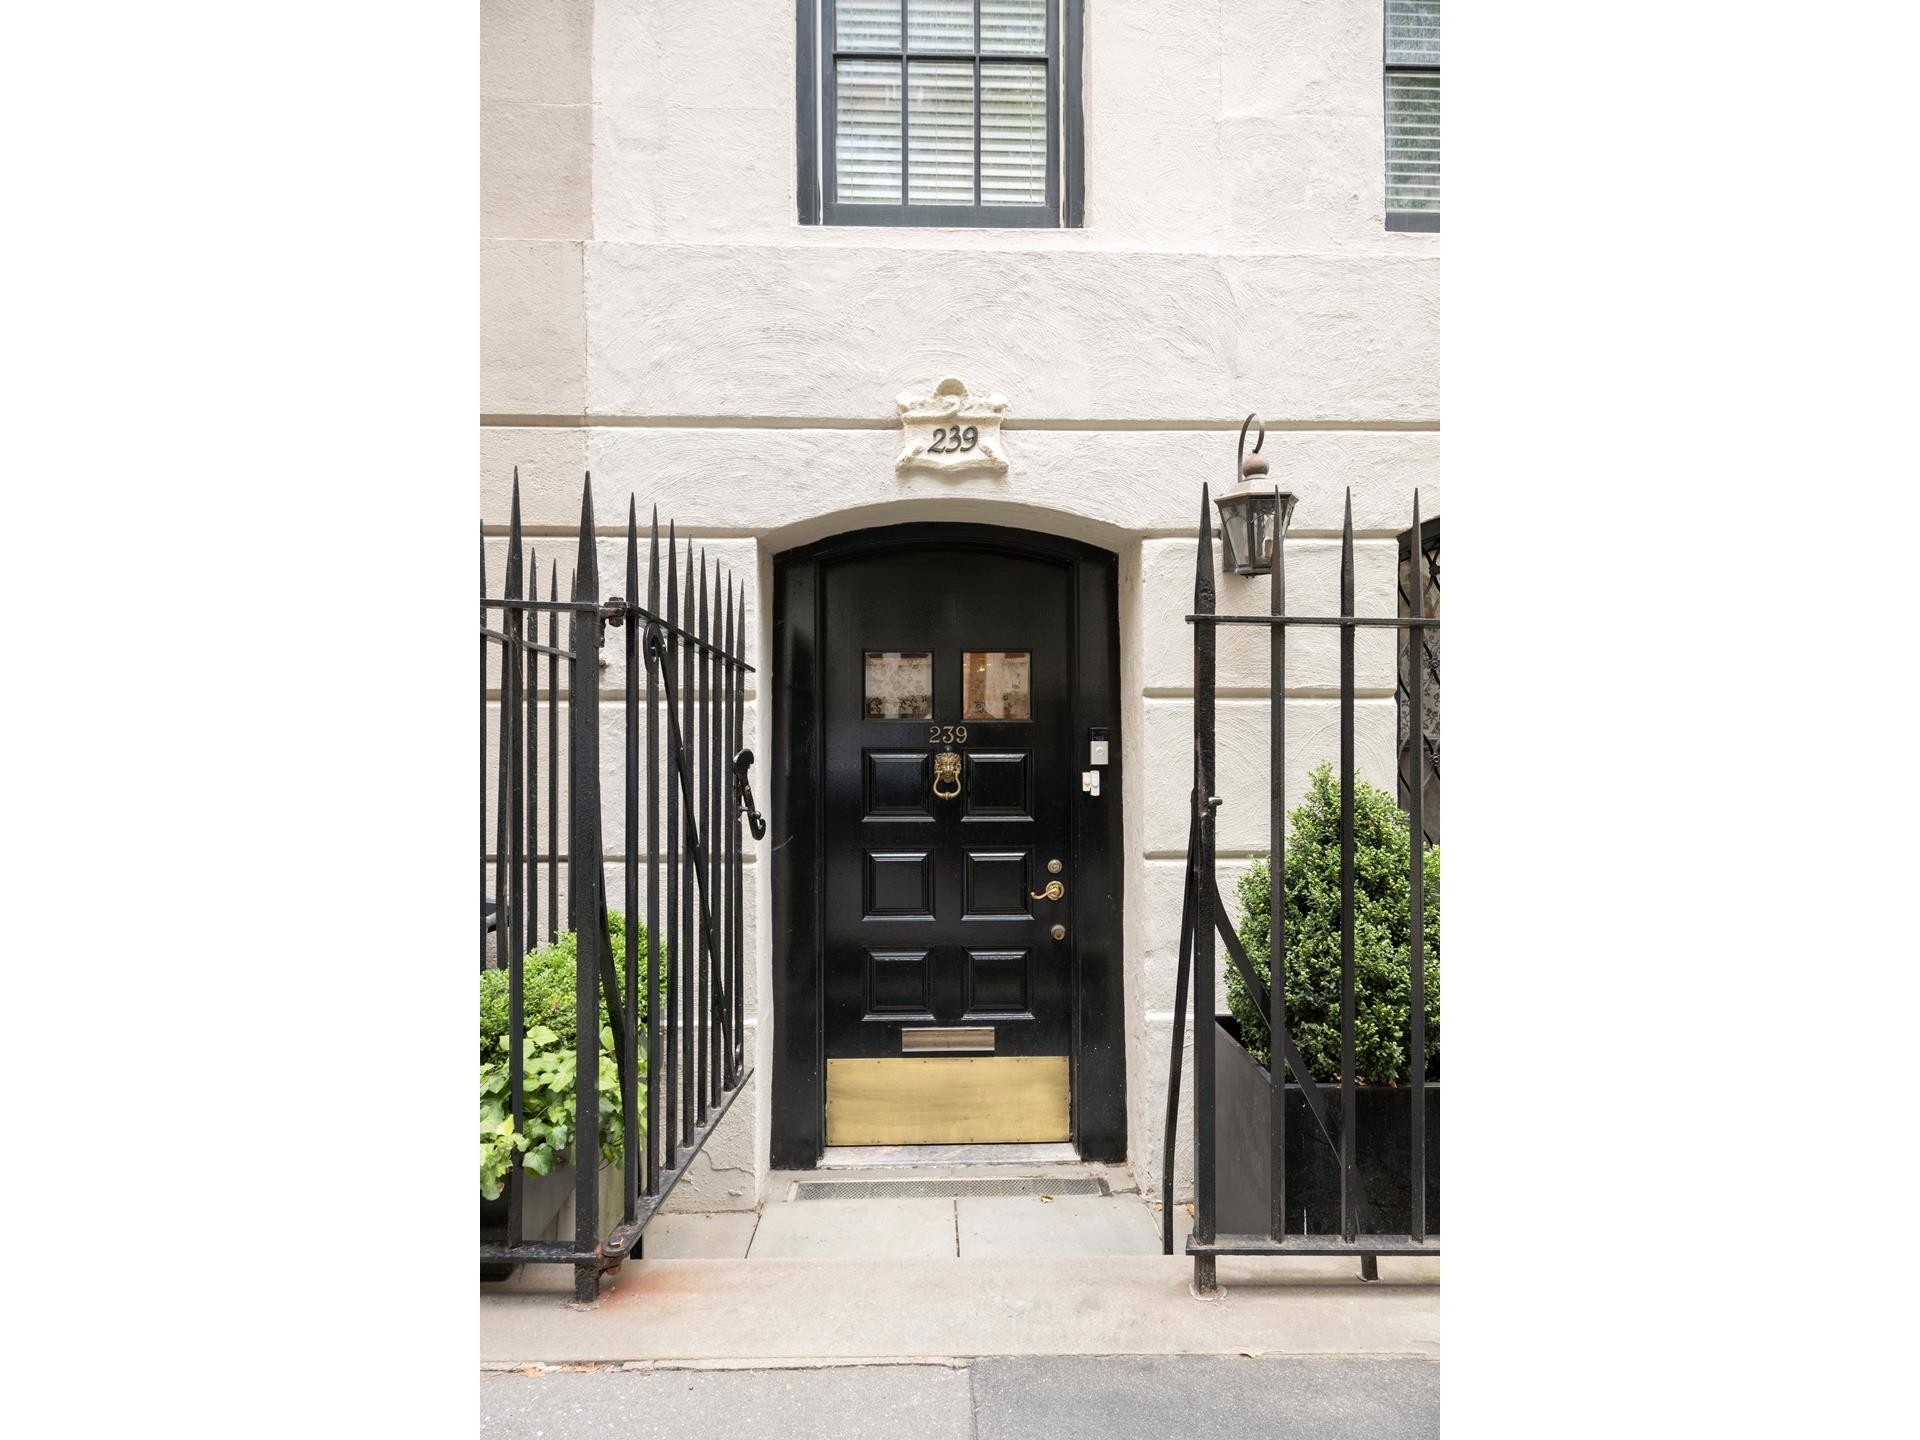 Single Family Townhouse for Sale at 239 E 48TH ST, TOWNHOUSE Turtle Bay, New York, NY 10017